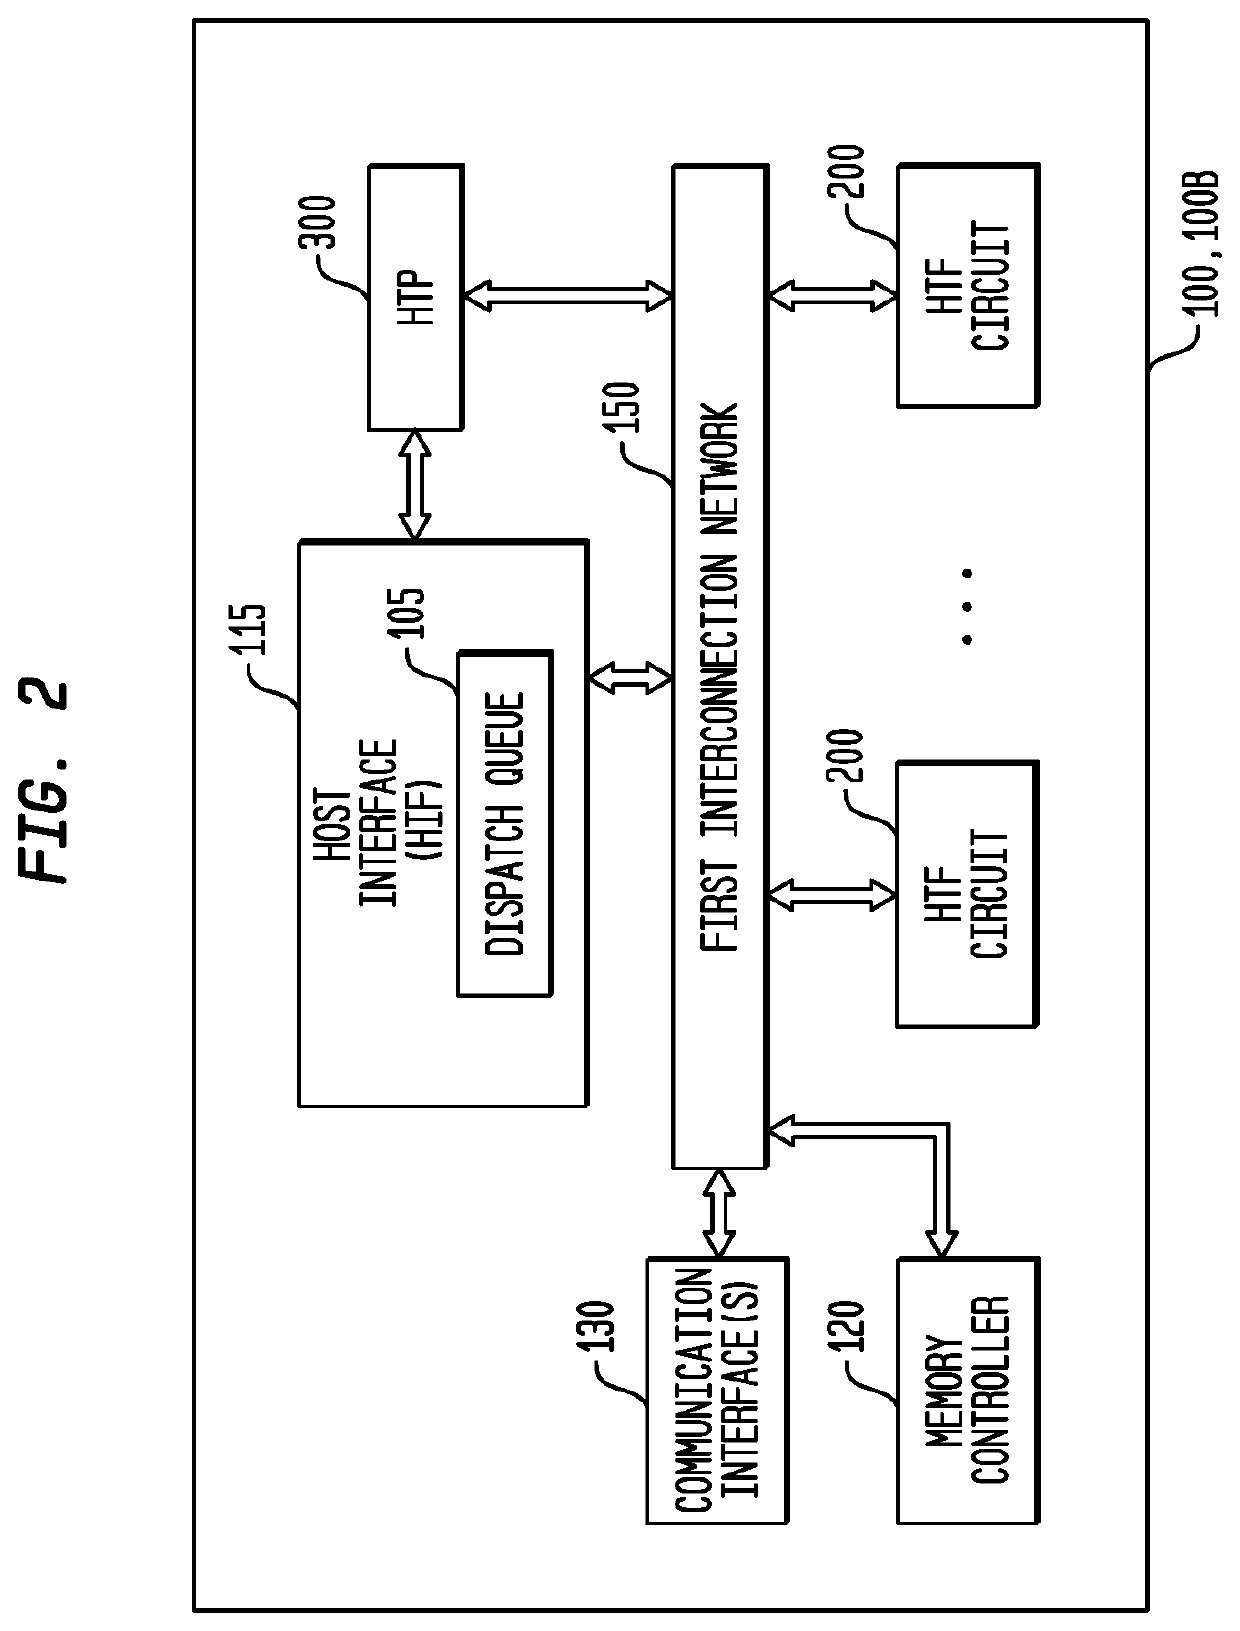 Adjustment of Load Access Size by a Multi-Threaded, Self-Scheduling Processor to Manage Network Congestion